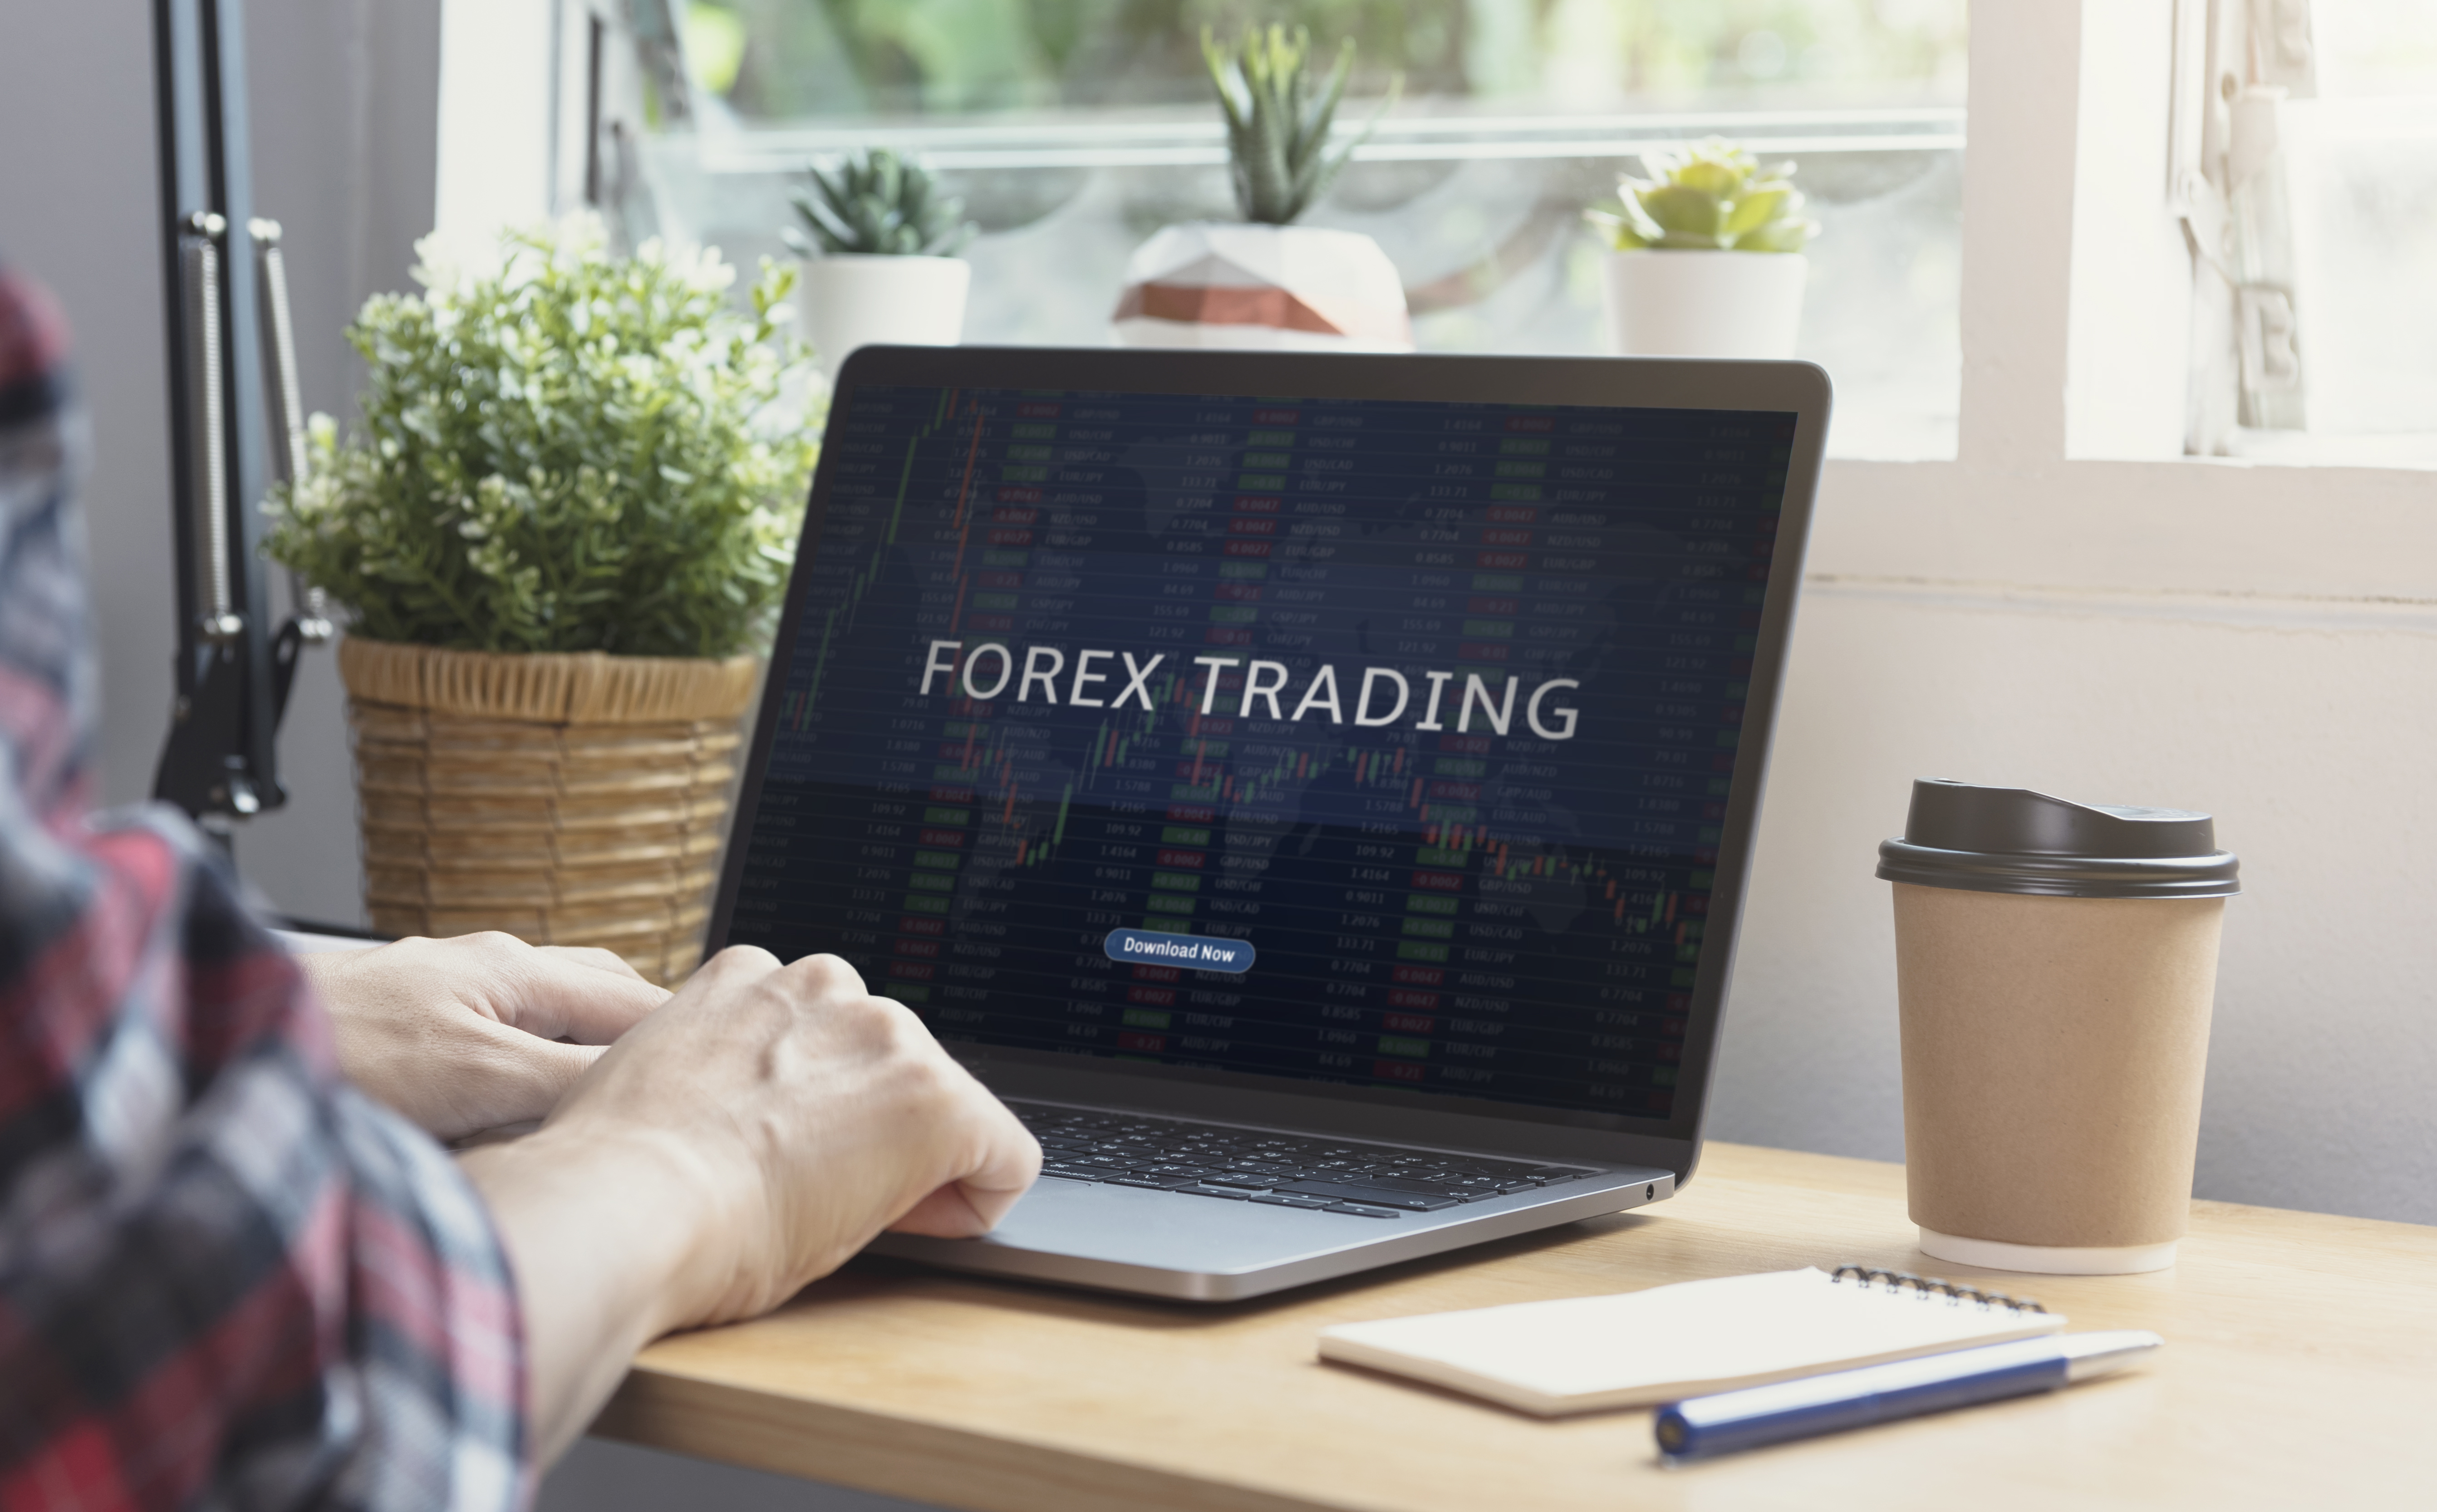 A group of businesspeople engaged in forex trading, stock market analysis, finance, and accounting, focused on generating forex leads and optimizing financial strategies.